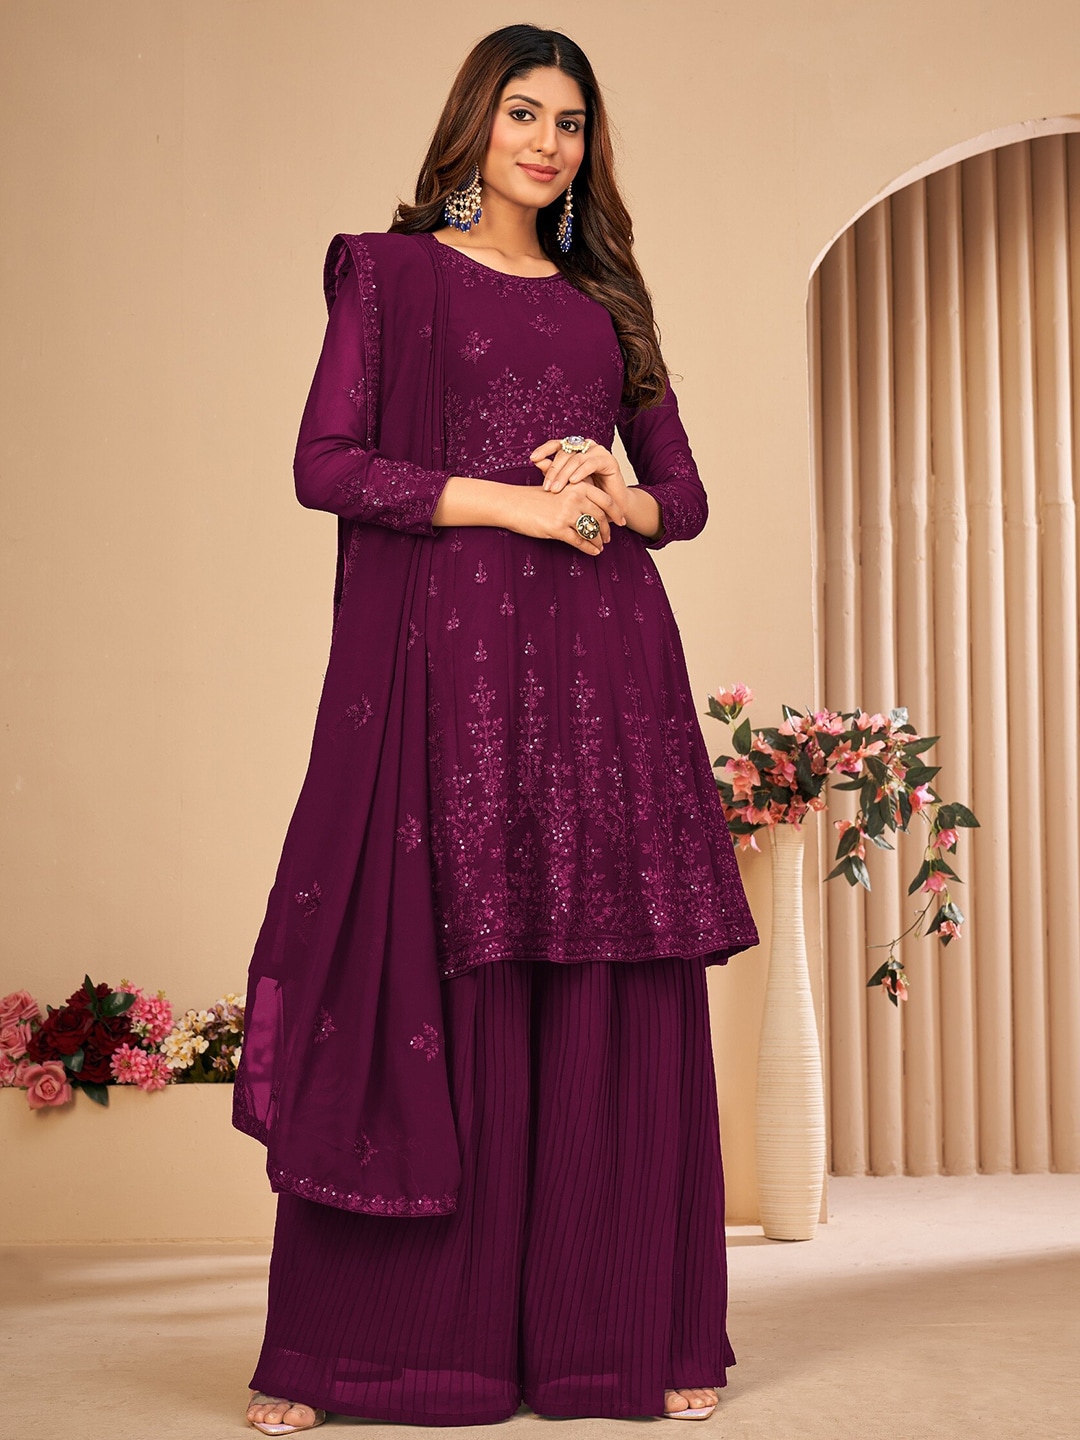 Divine International Trading Co Purple Embroidered Unstitched Dress Material Price in India